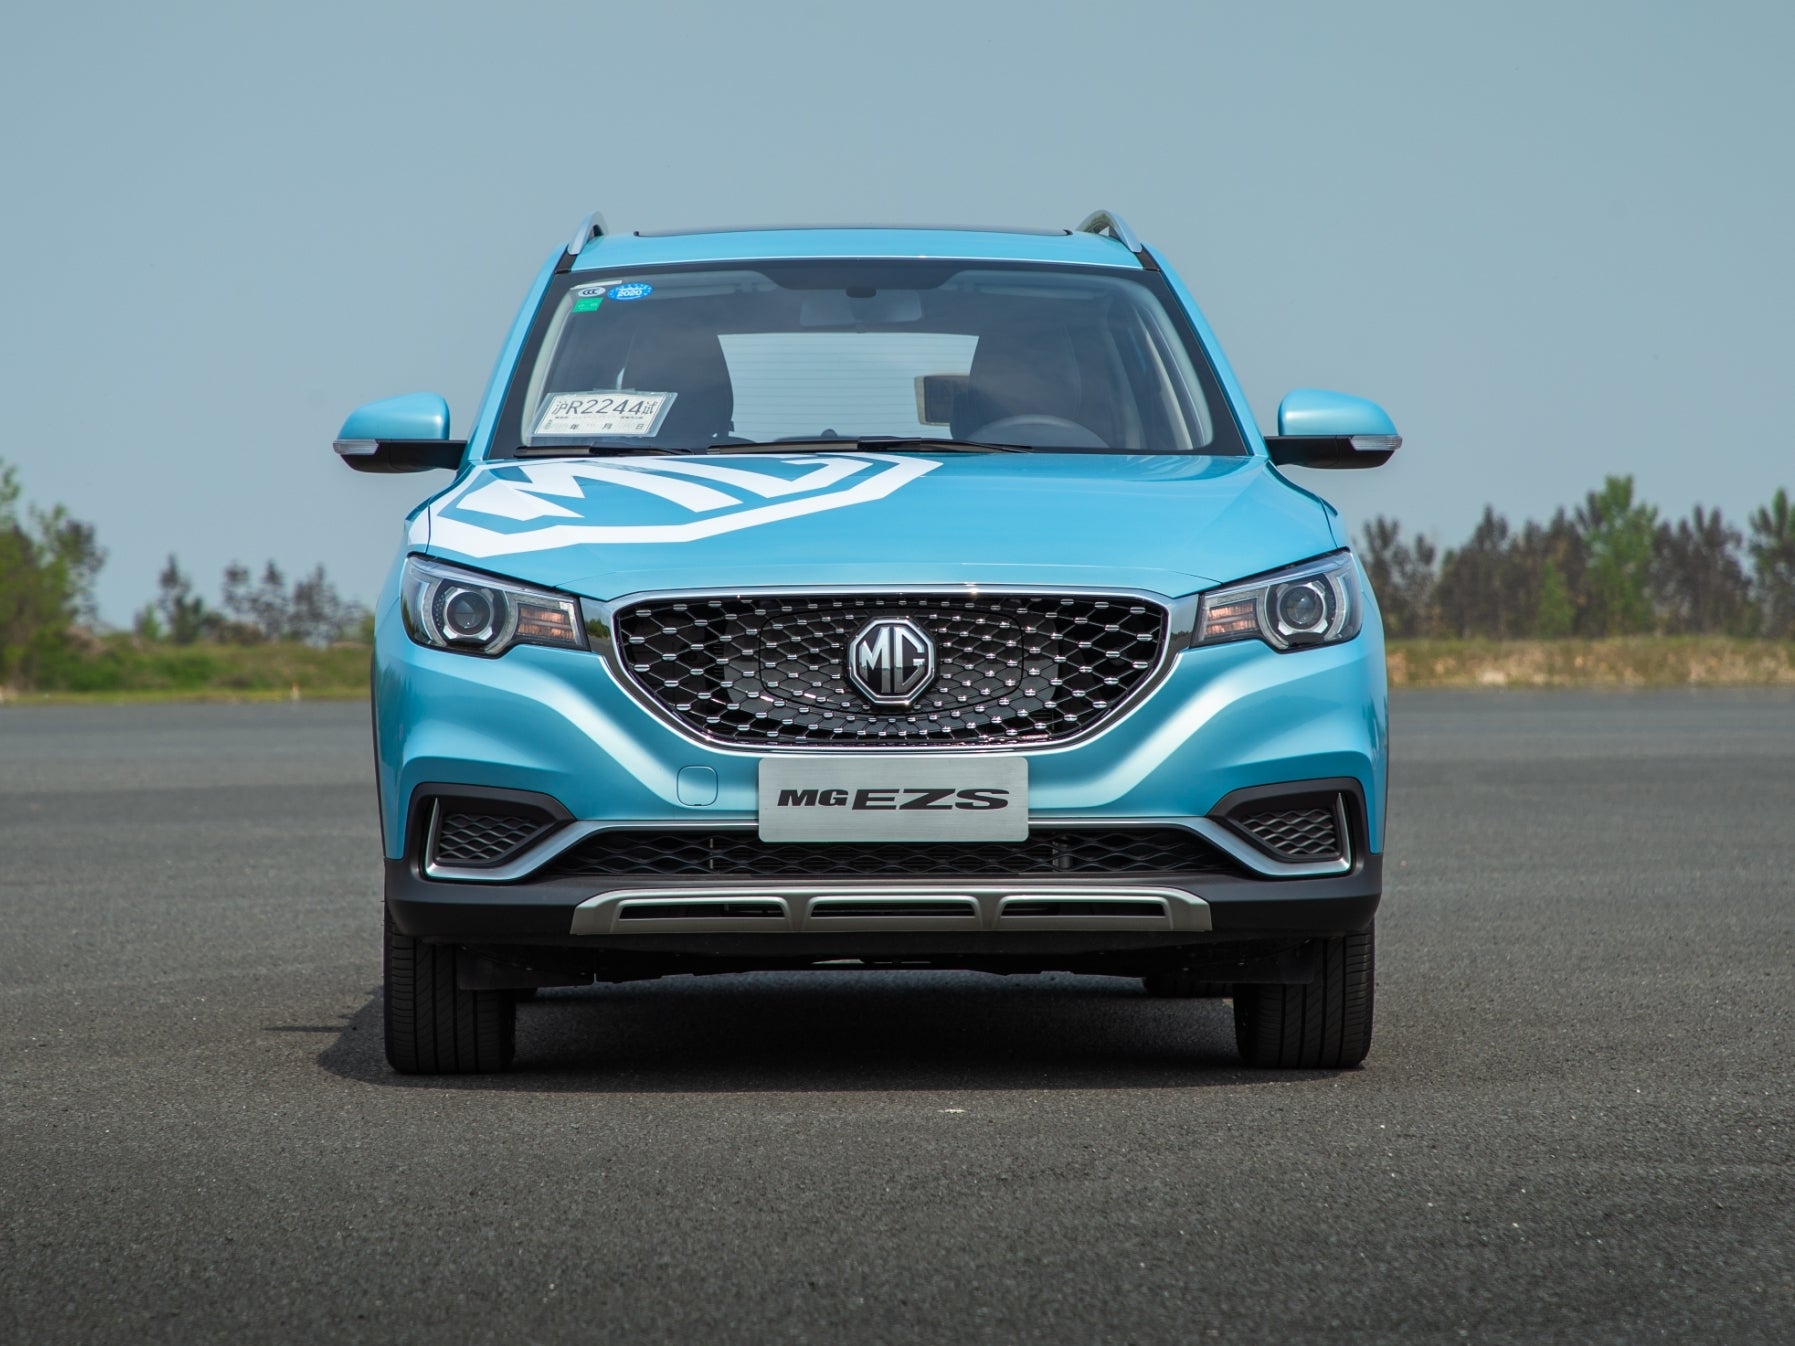 The bold grille, which has little sign of a family resemblance to older MGs, works well in giving it some identity